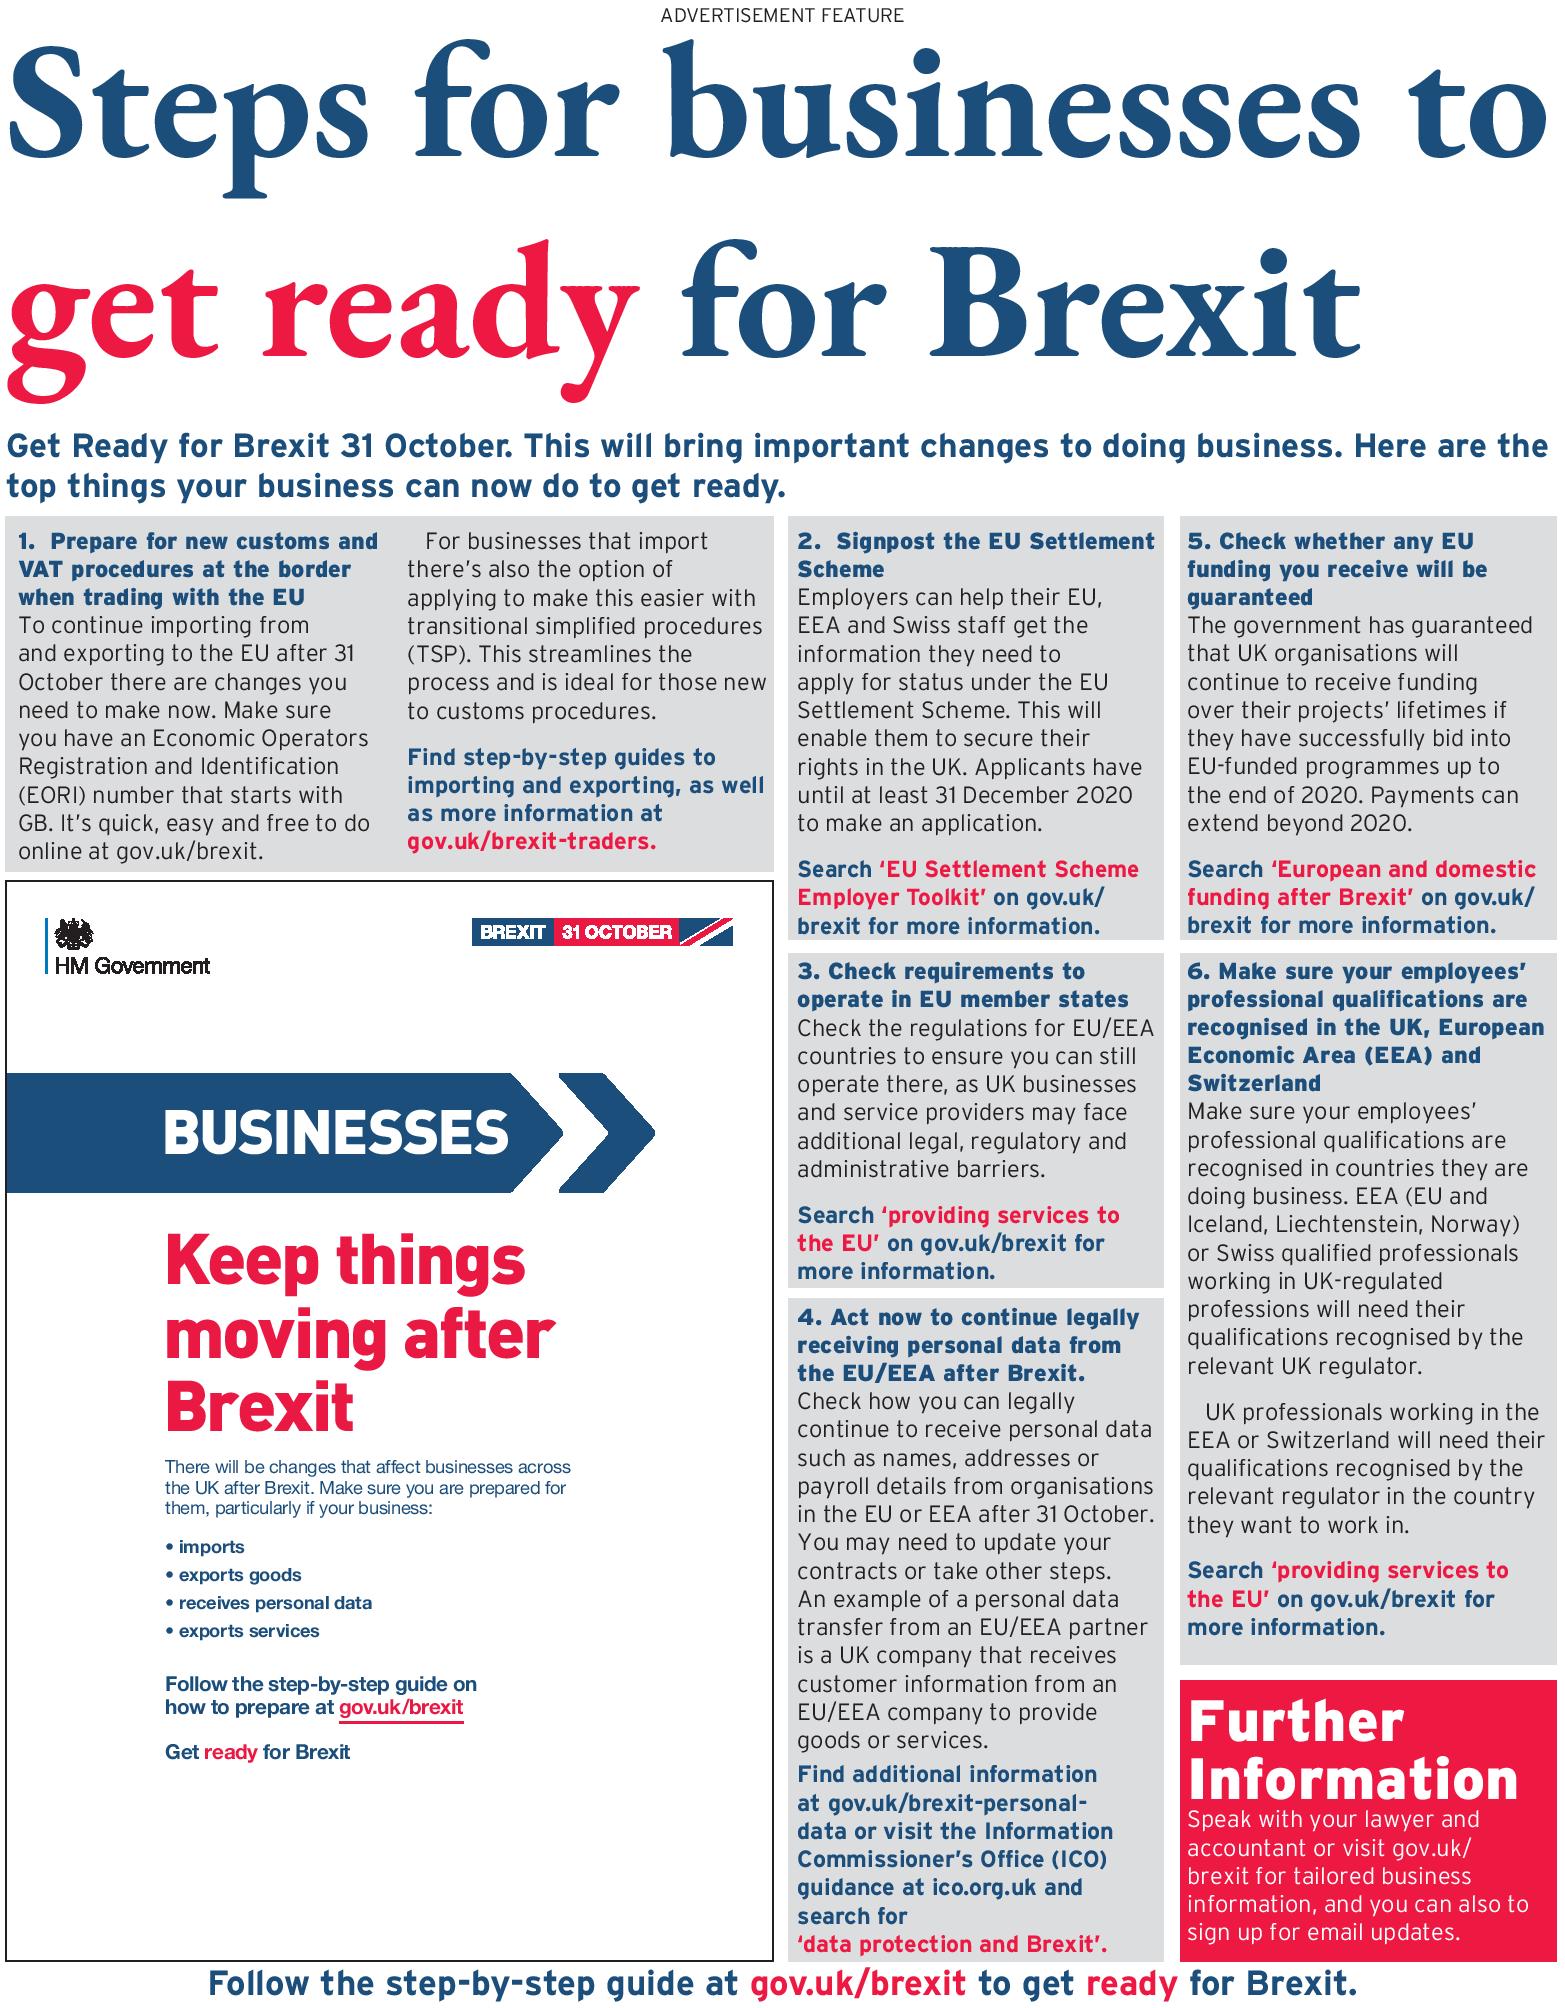 New Ads In Brexit Featurelink Campaign